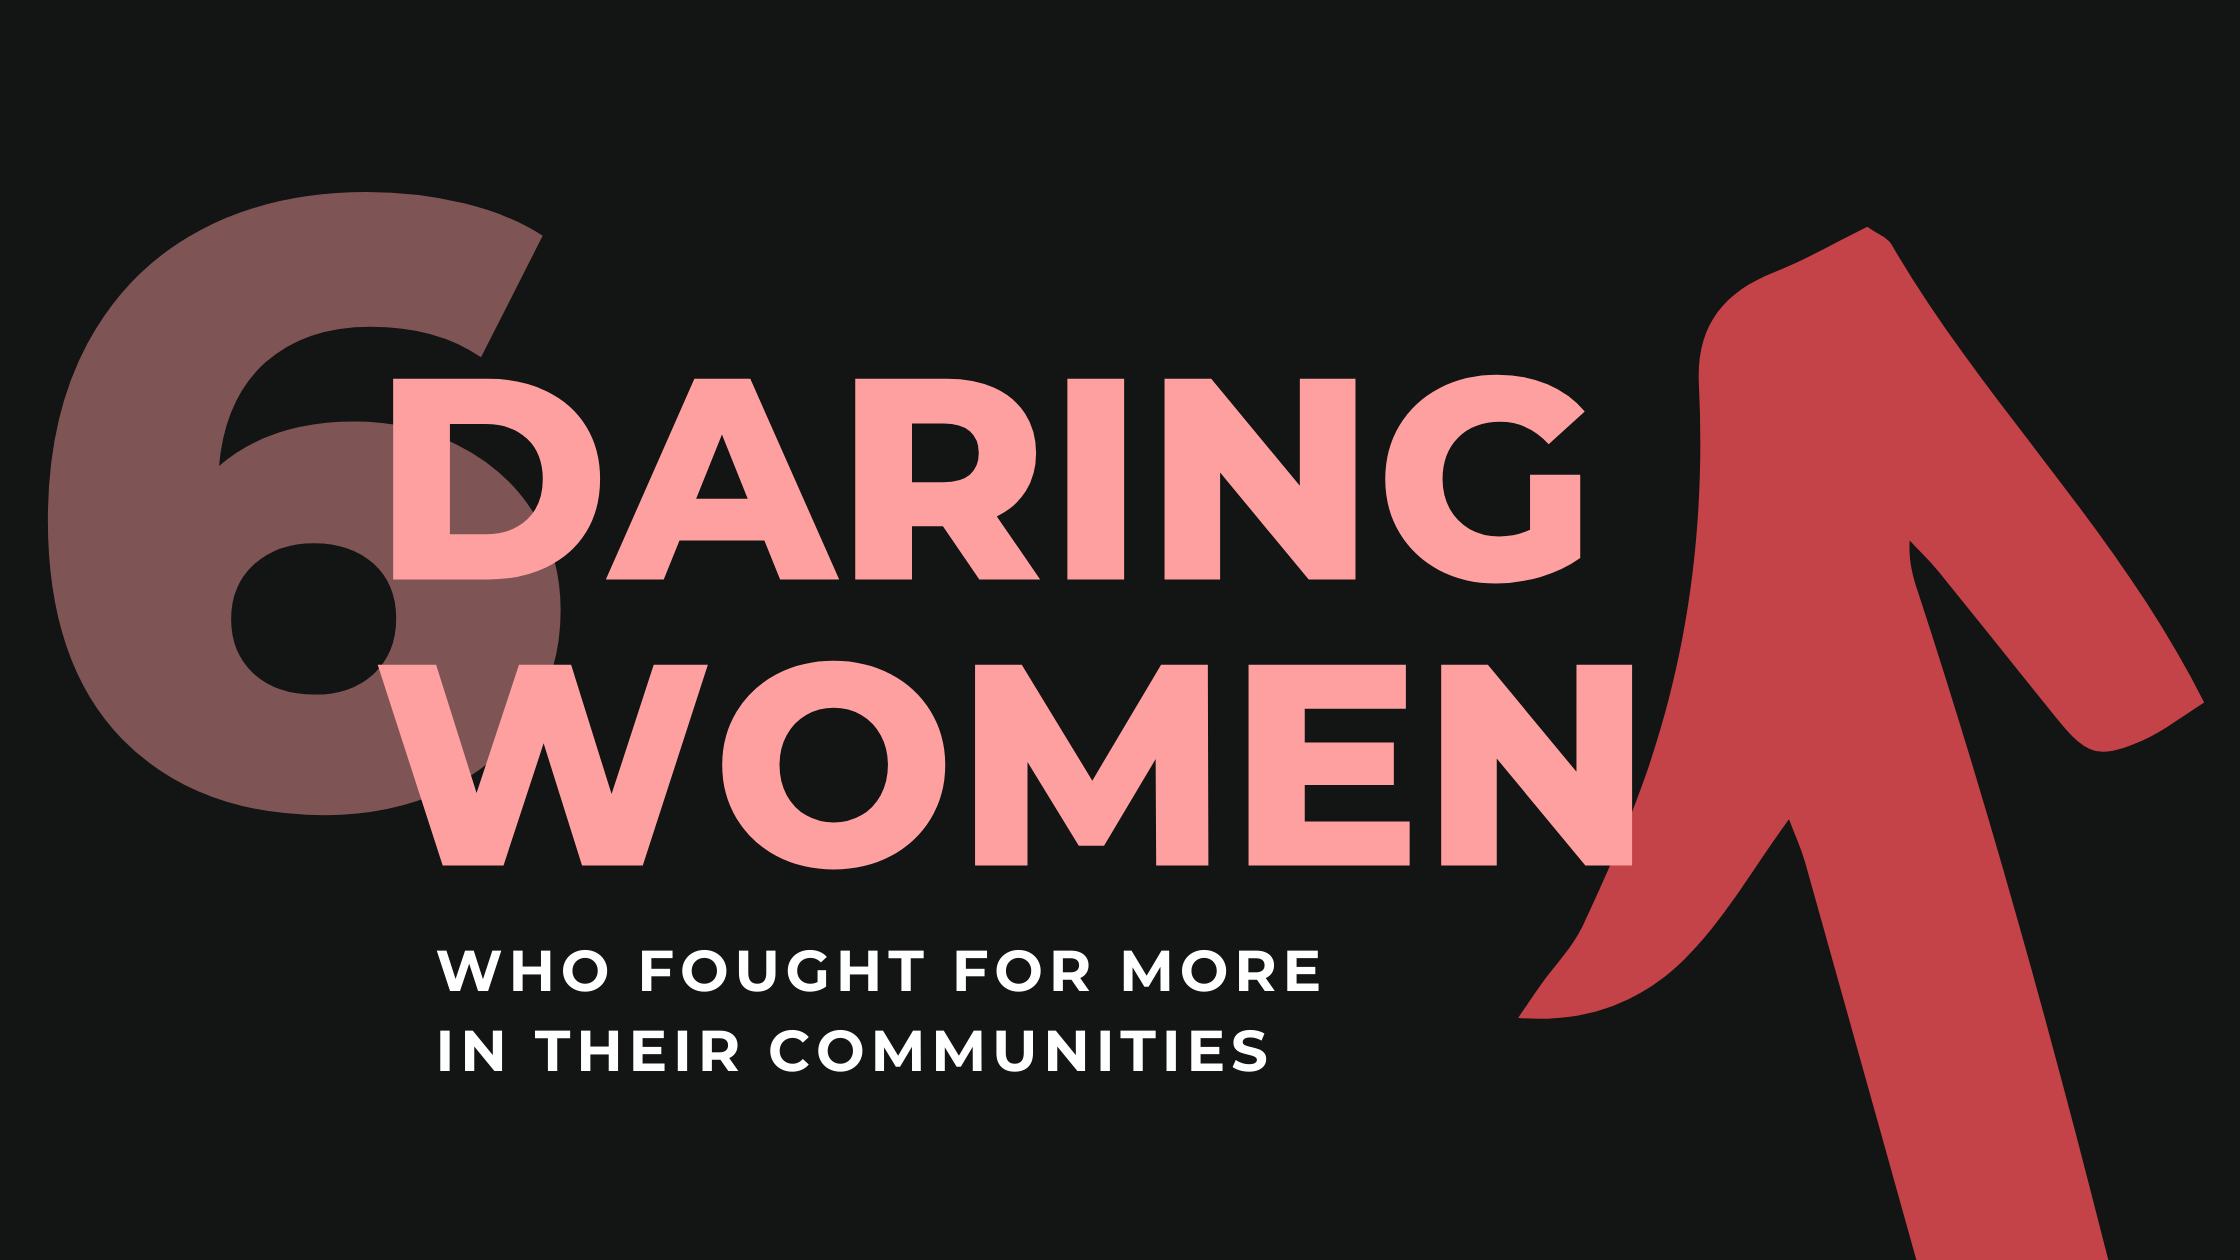 6 Daring Women Who Fought for More in Their Communities